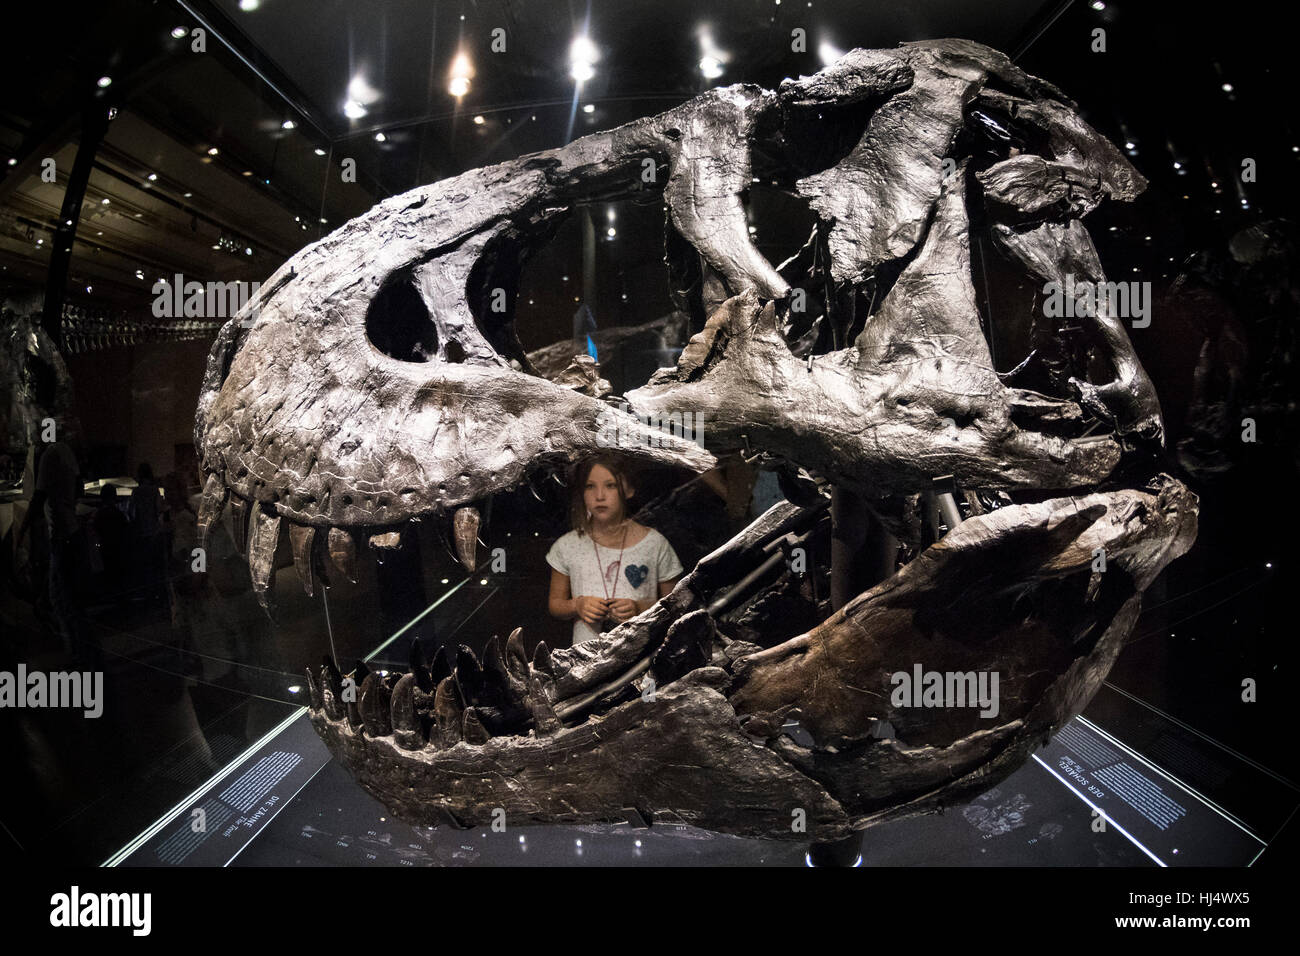 Berlin. Germany. Museum für Naturkunde, young girl looking at a model reconstruction skull of 'Tristan', Tyrannosaurus rex. Stock Photo